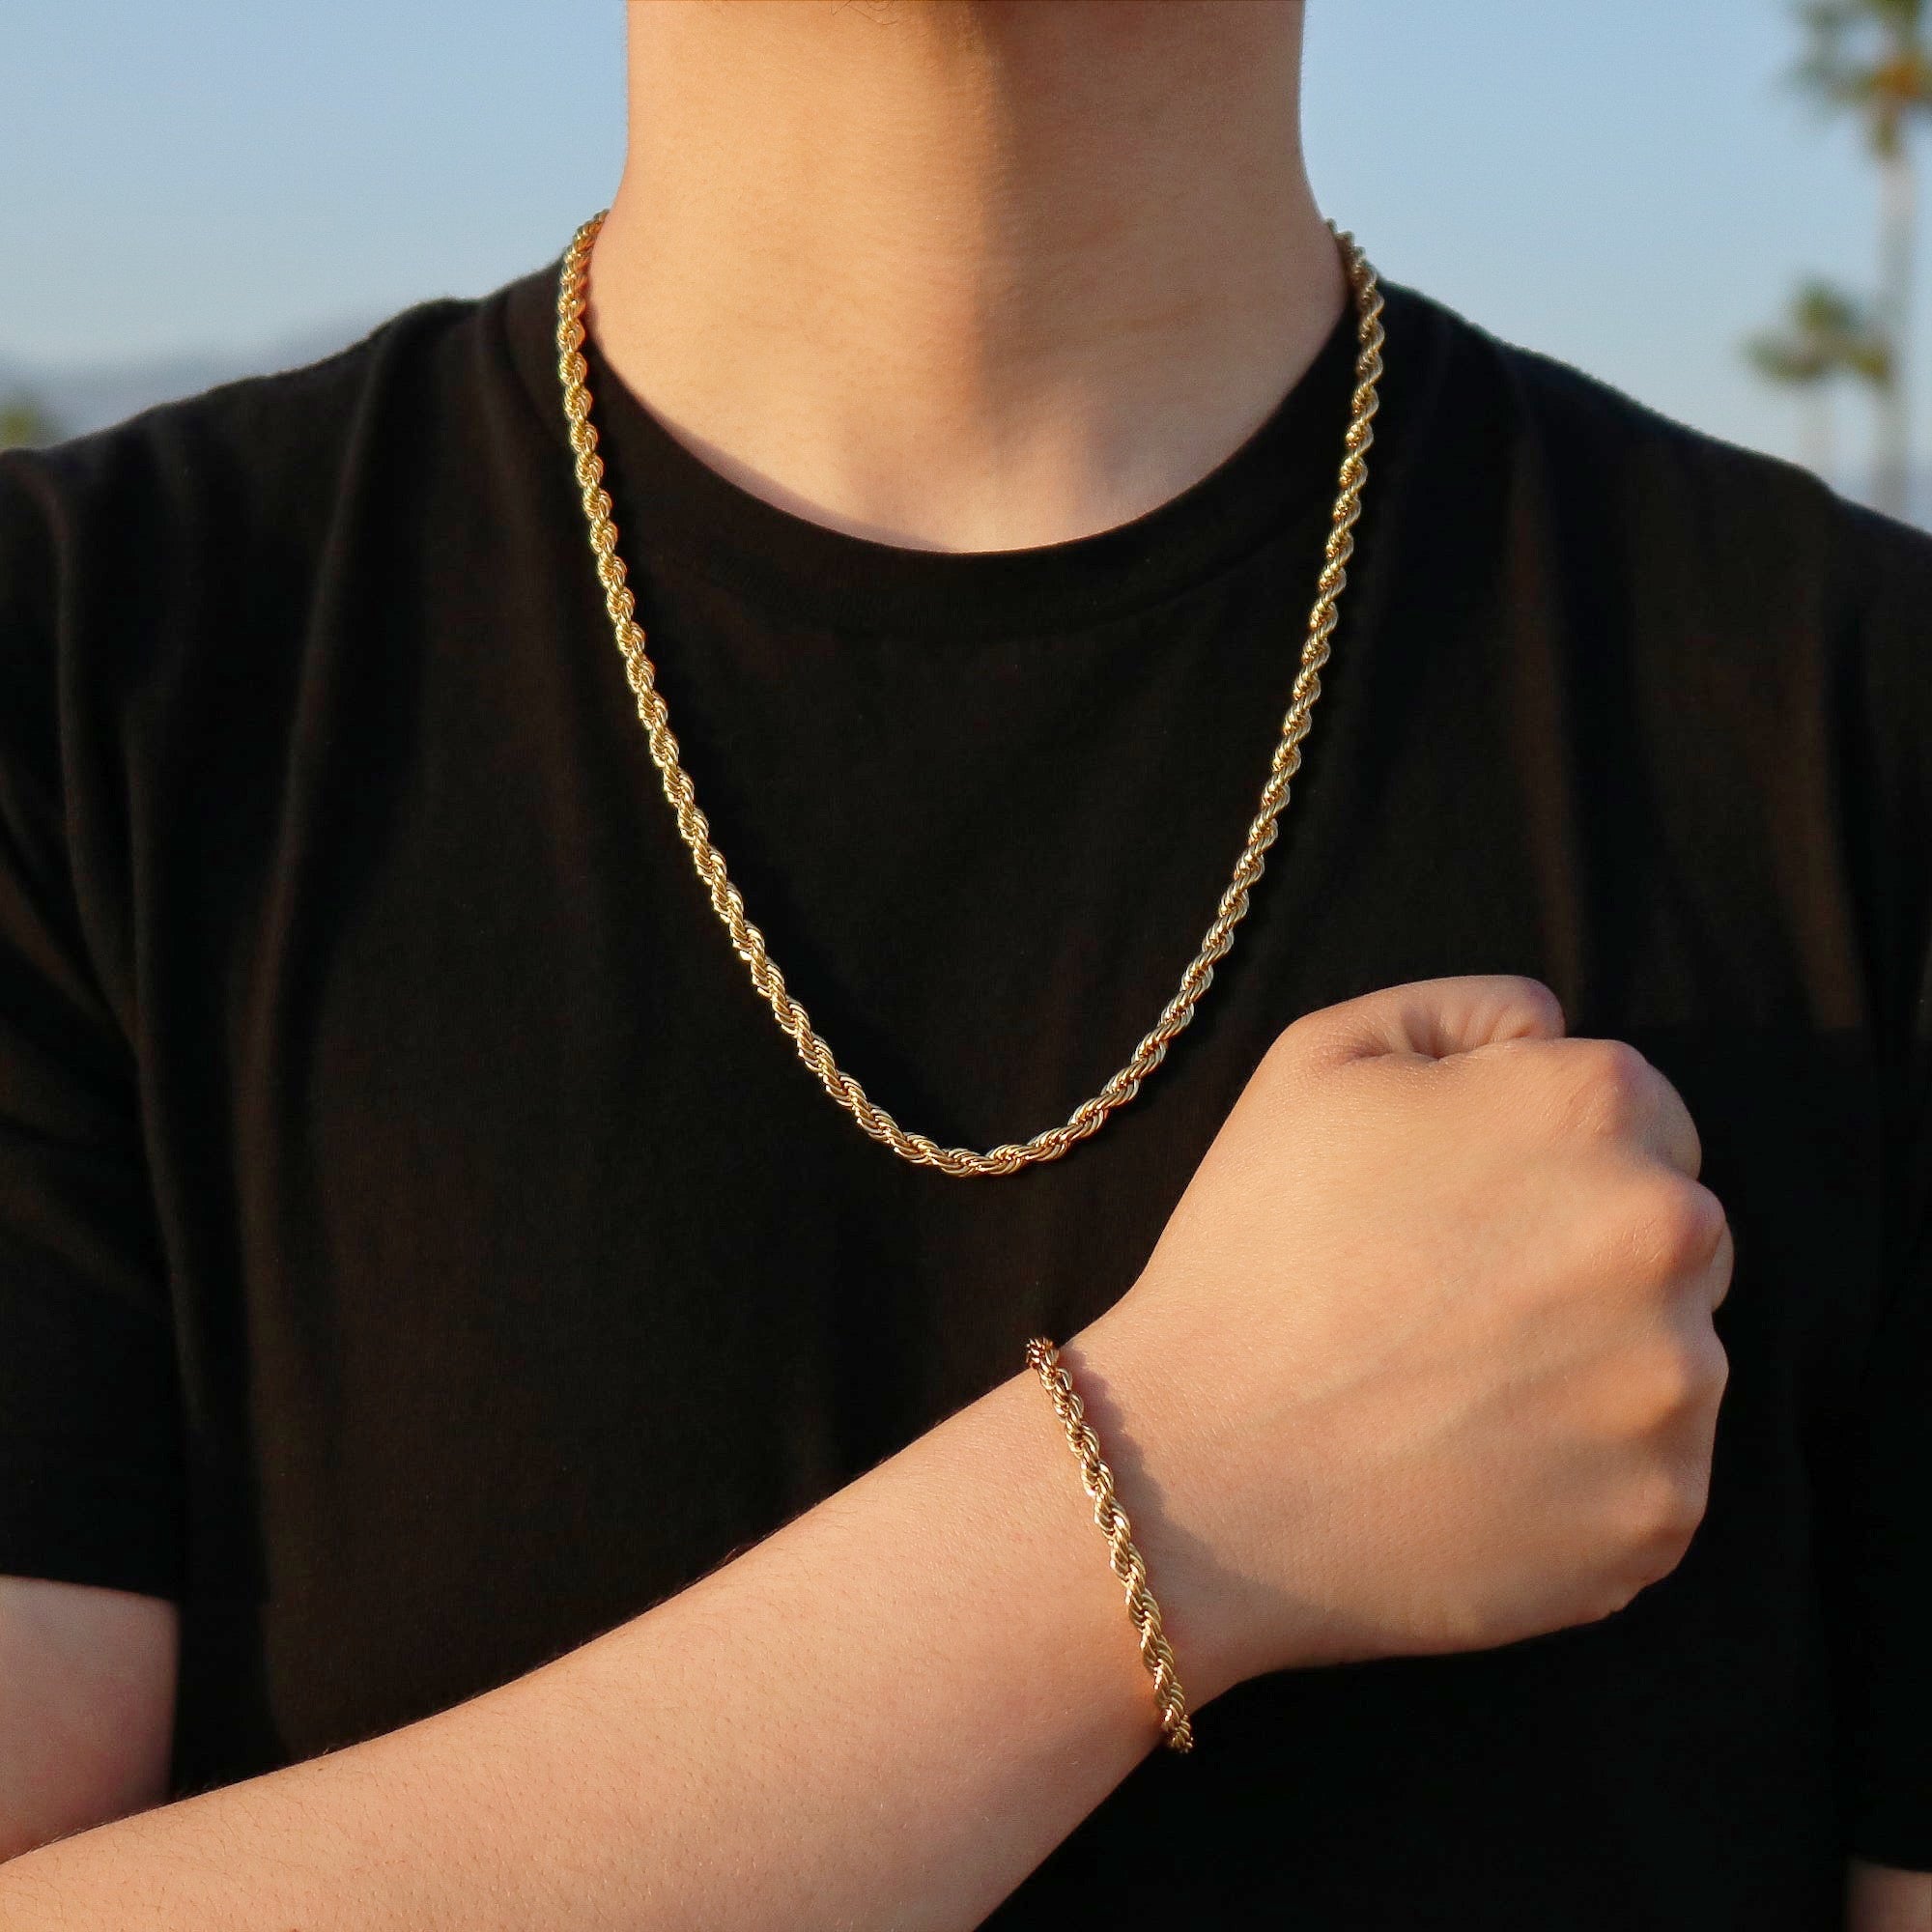 Rope chain and bracelet